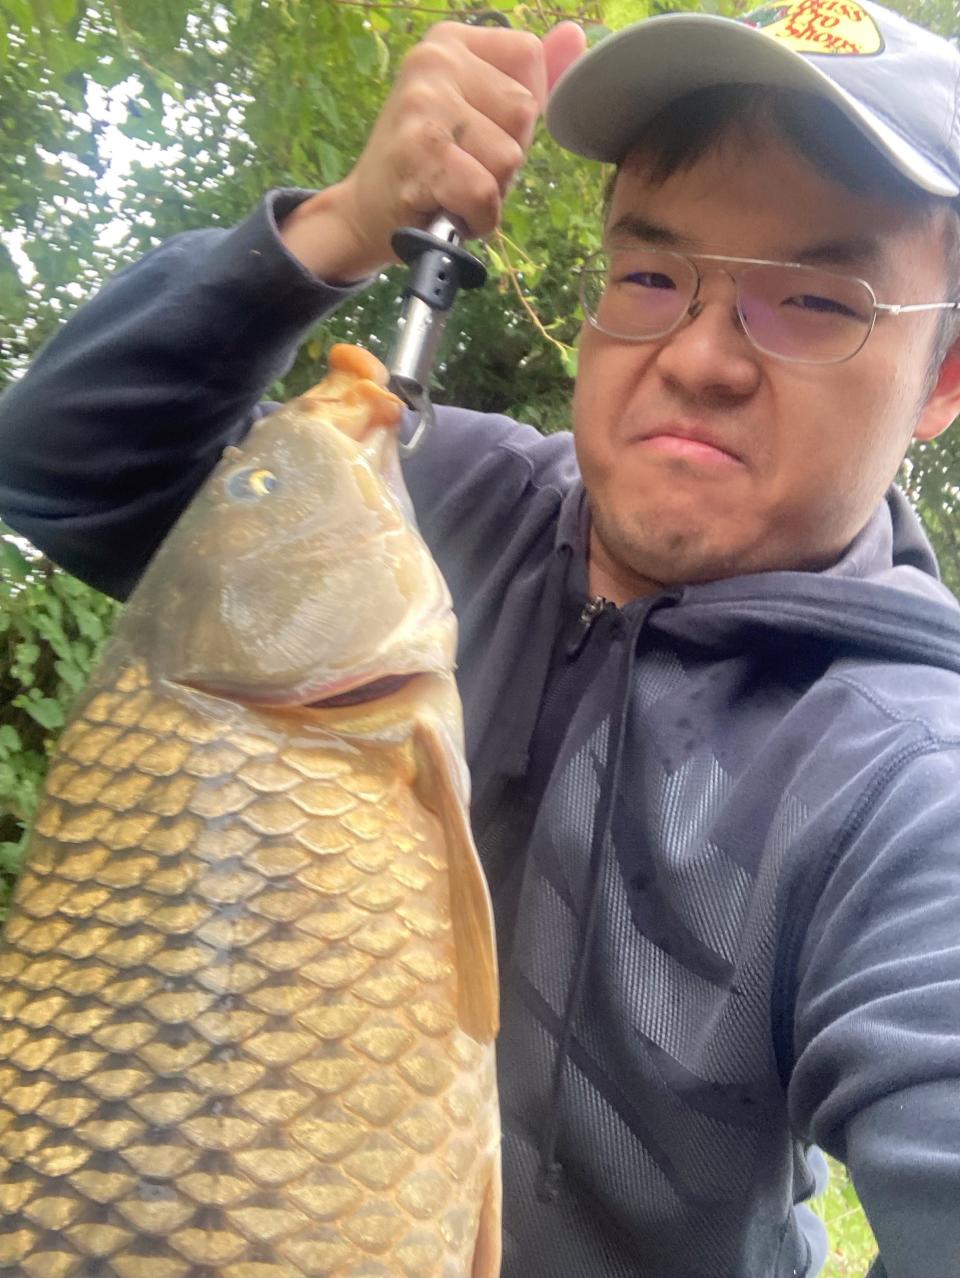 Liu He, here with a common carp he fished out of the Wabash River, won 15 Fish of the Year awards in 2022 through the Indiana Department of Natural Resources.